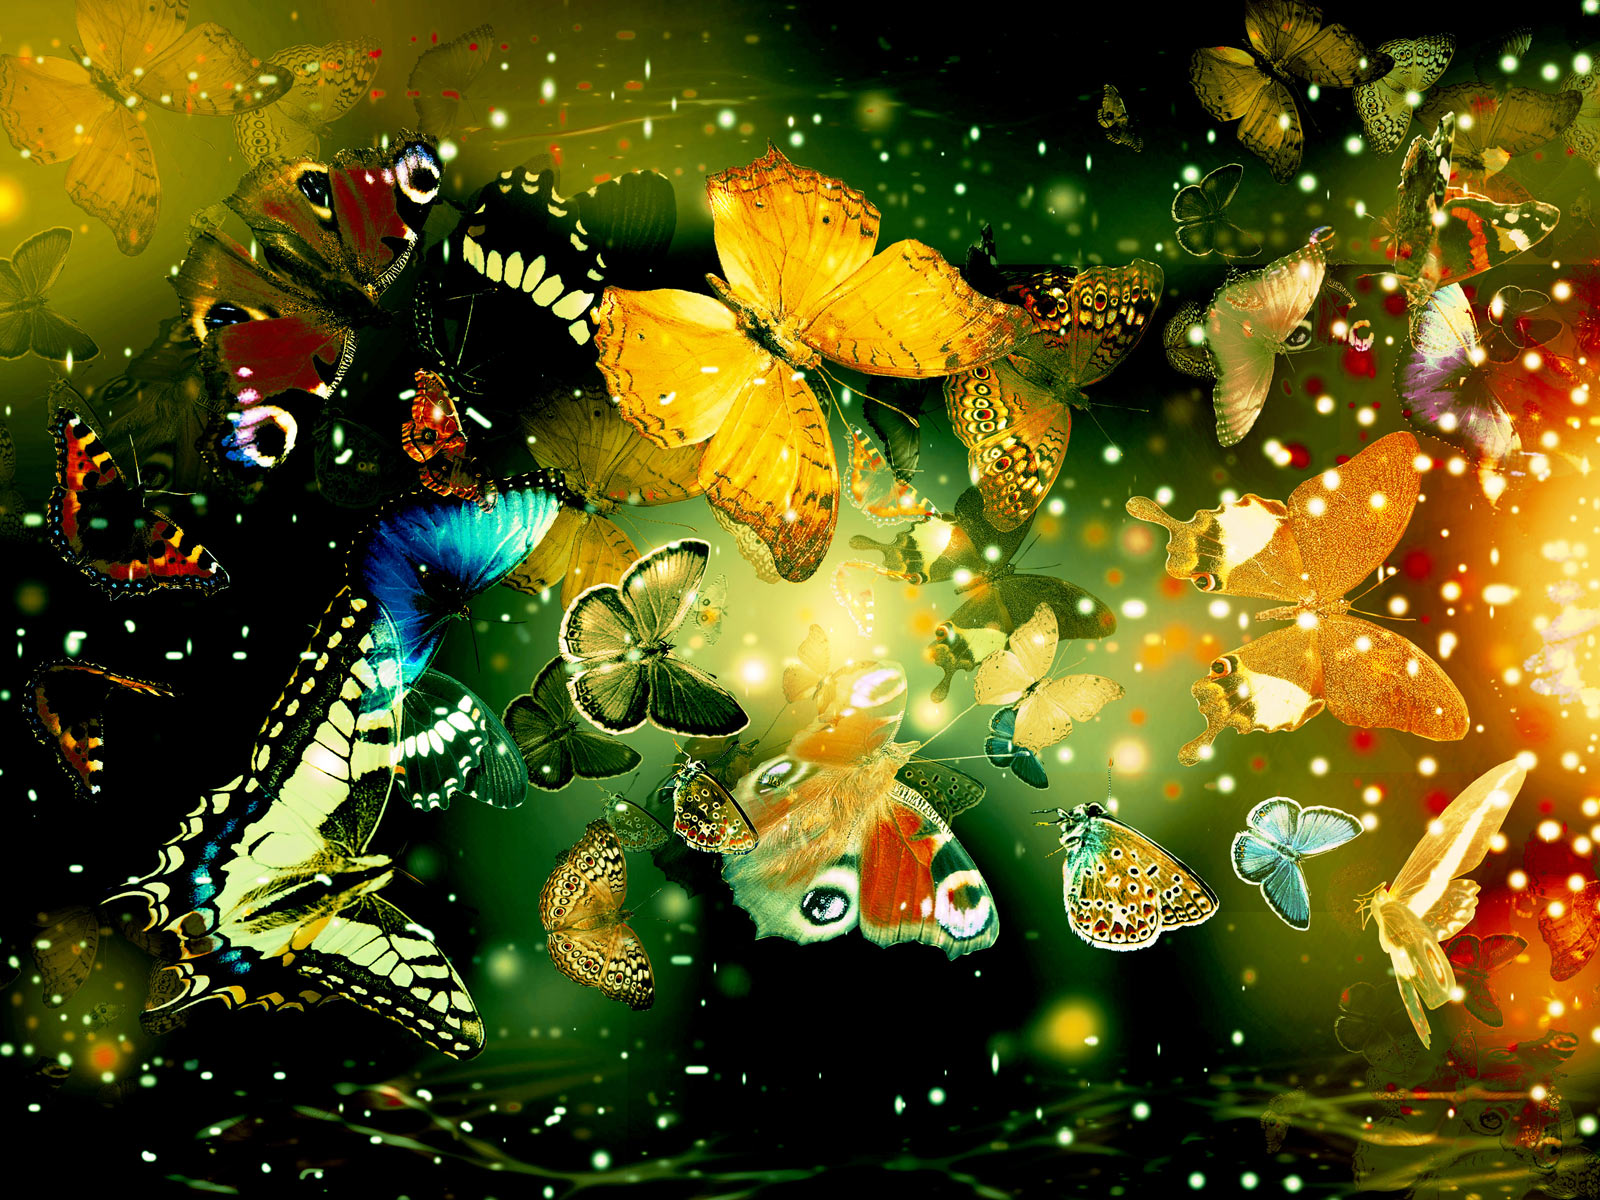 Magazines-24: Computer wallpaper backgrounds, free computer ...